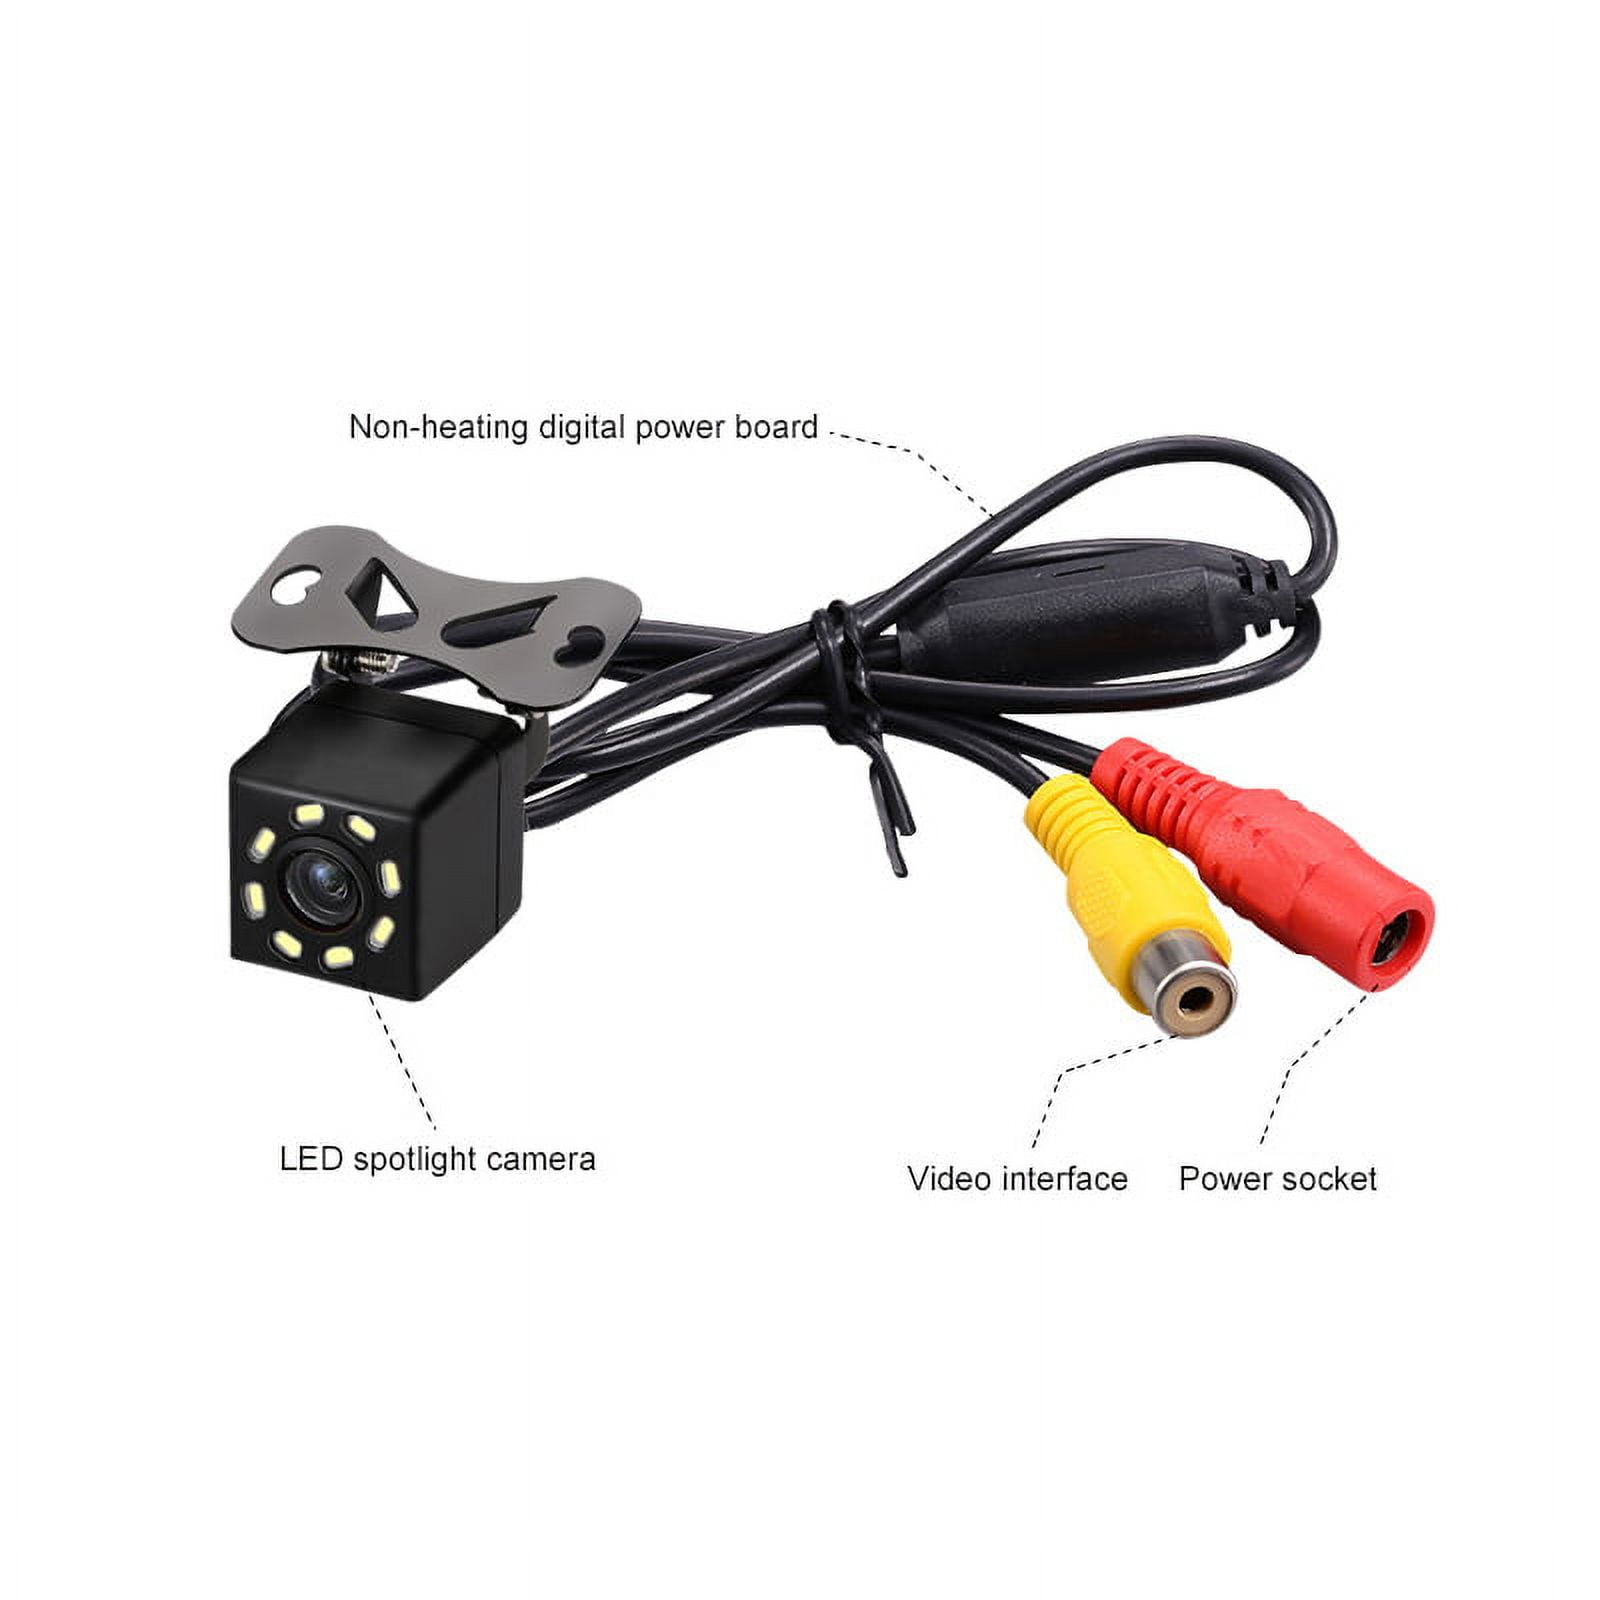 Accedre 8LED Night Vision Car Reverse Parking Camera Vehicle Camera System